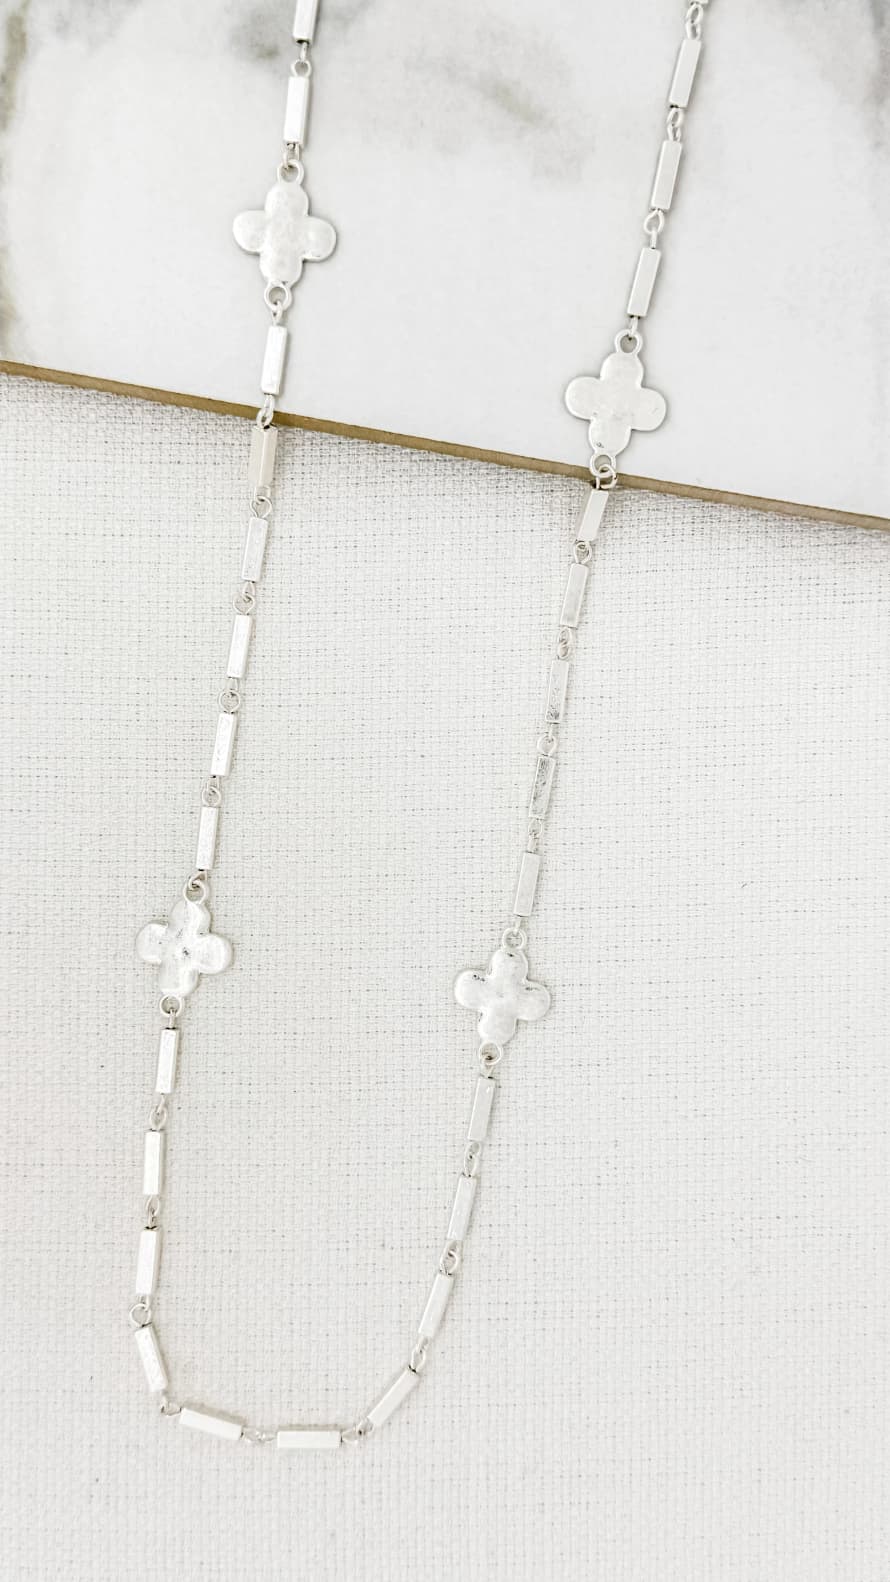 Envy Long Worn Silver Necklace with Silver Fleurs